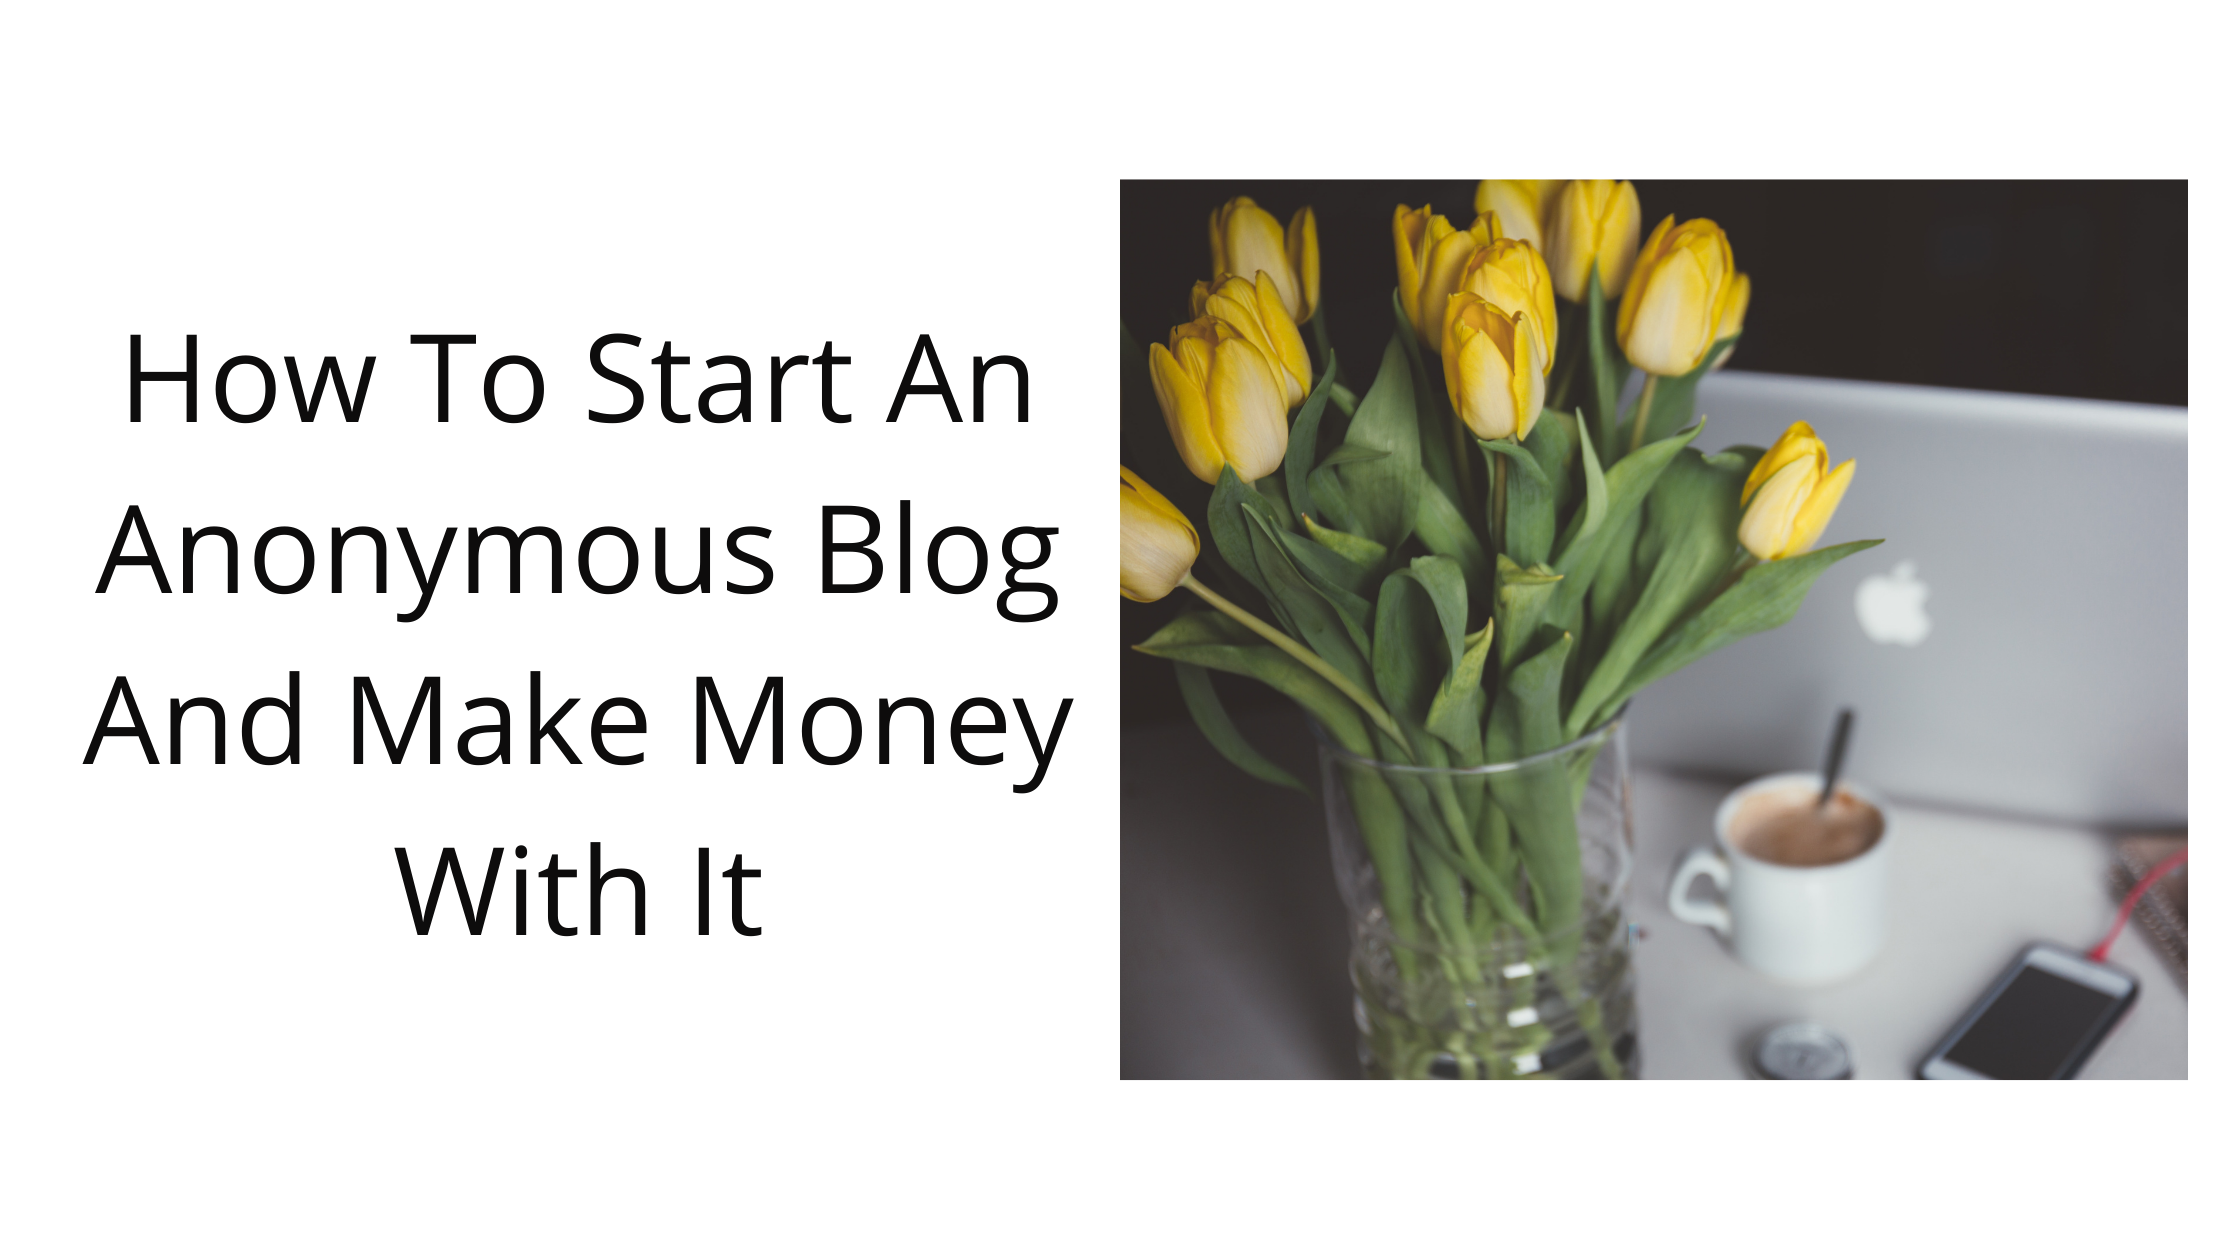 How To Start An Anonymous Blog And Make Money With It